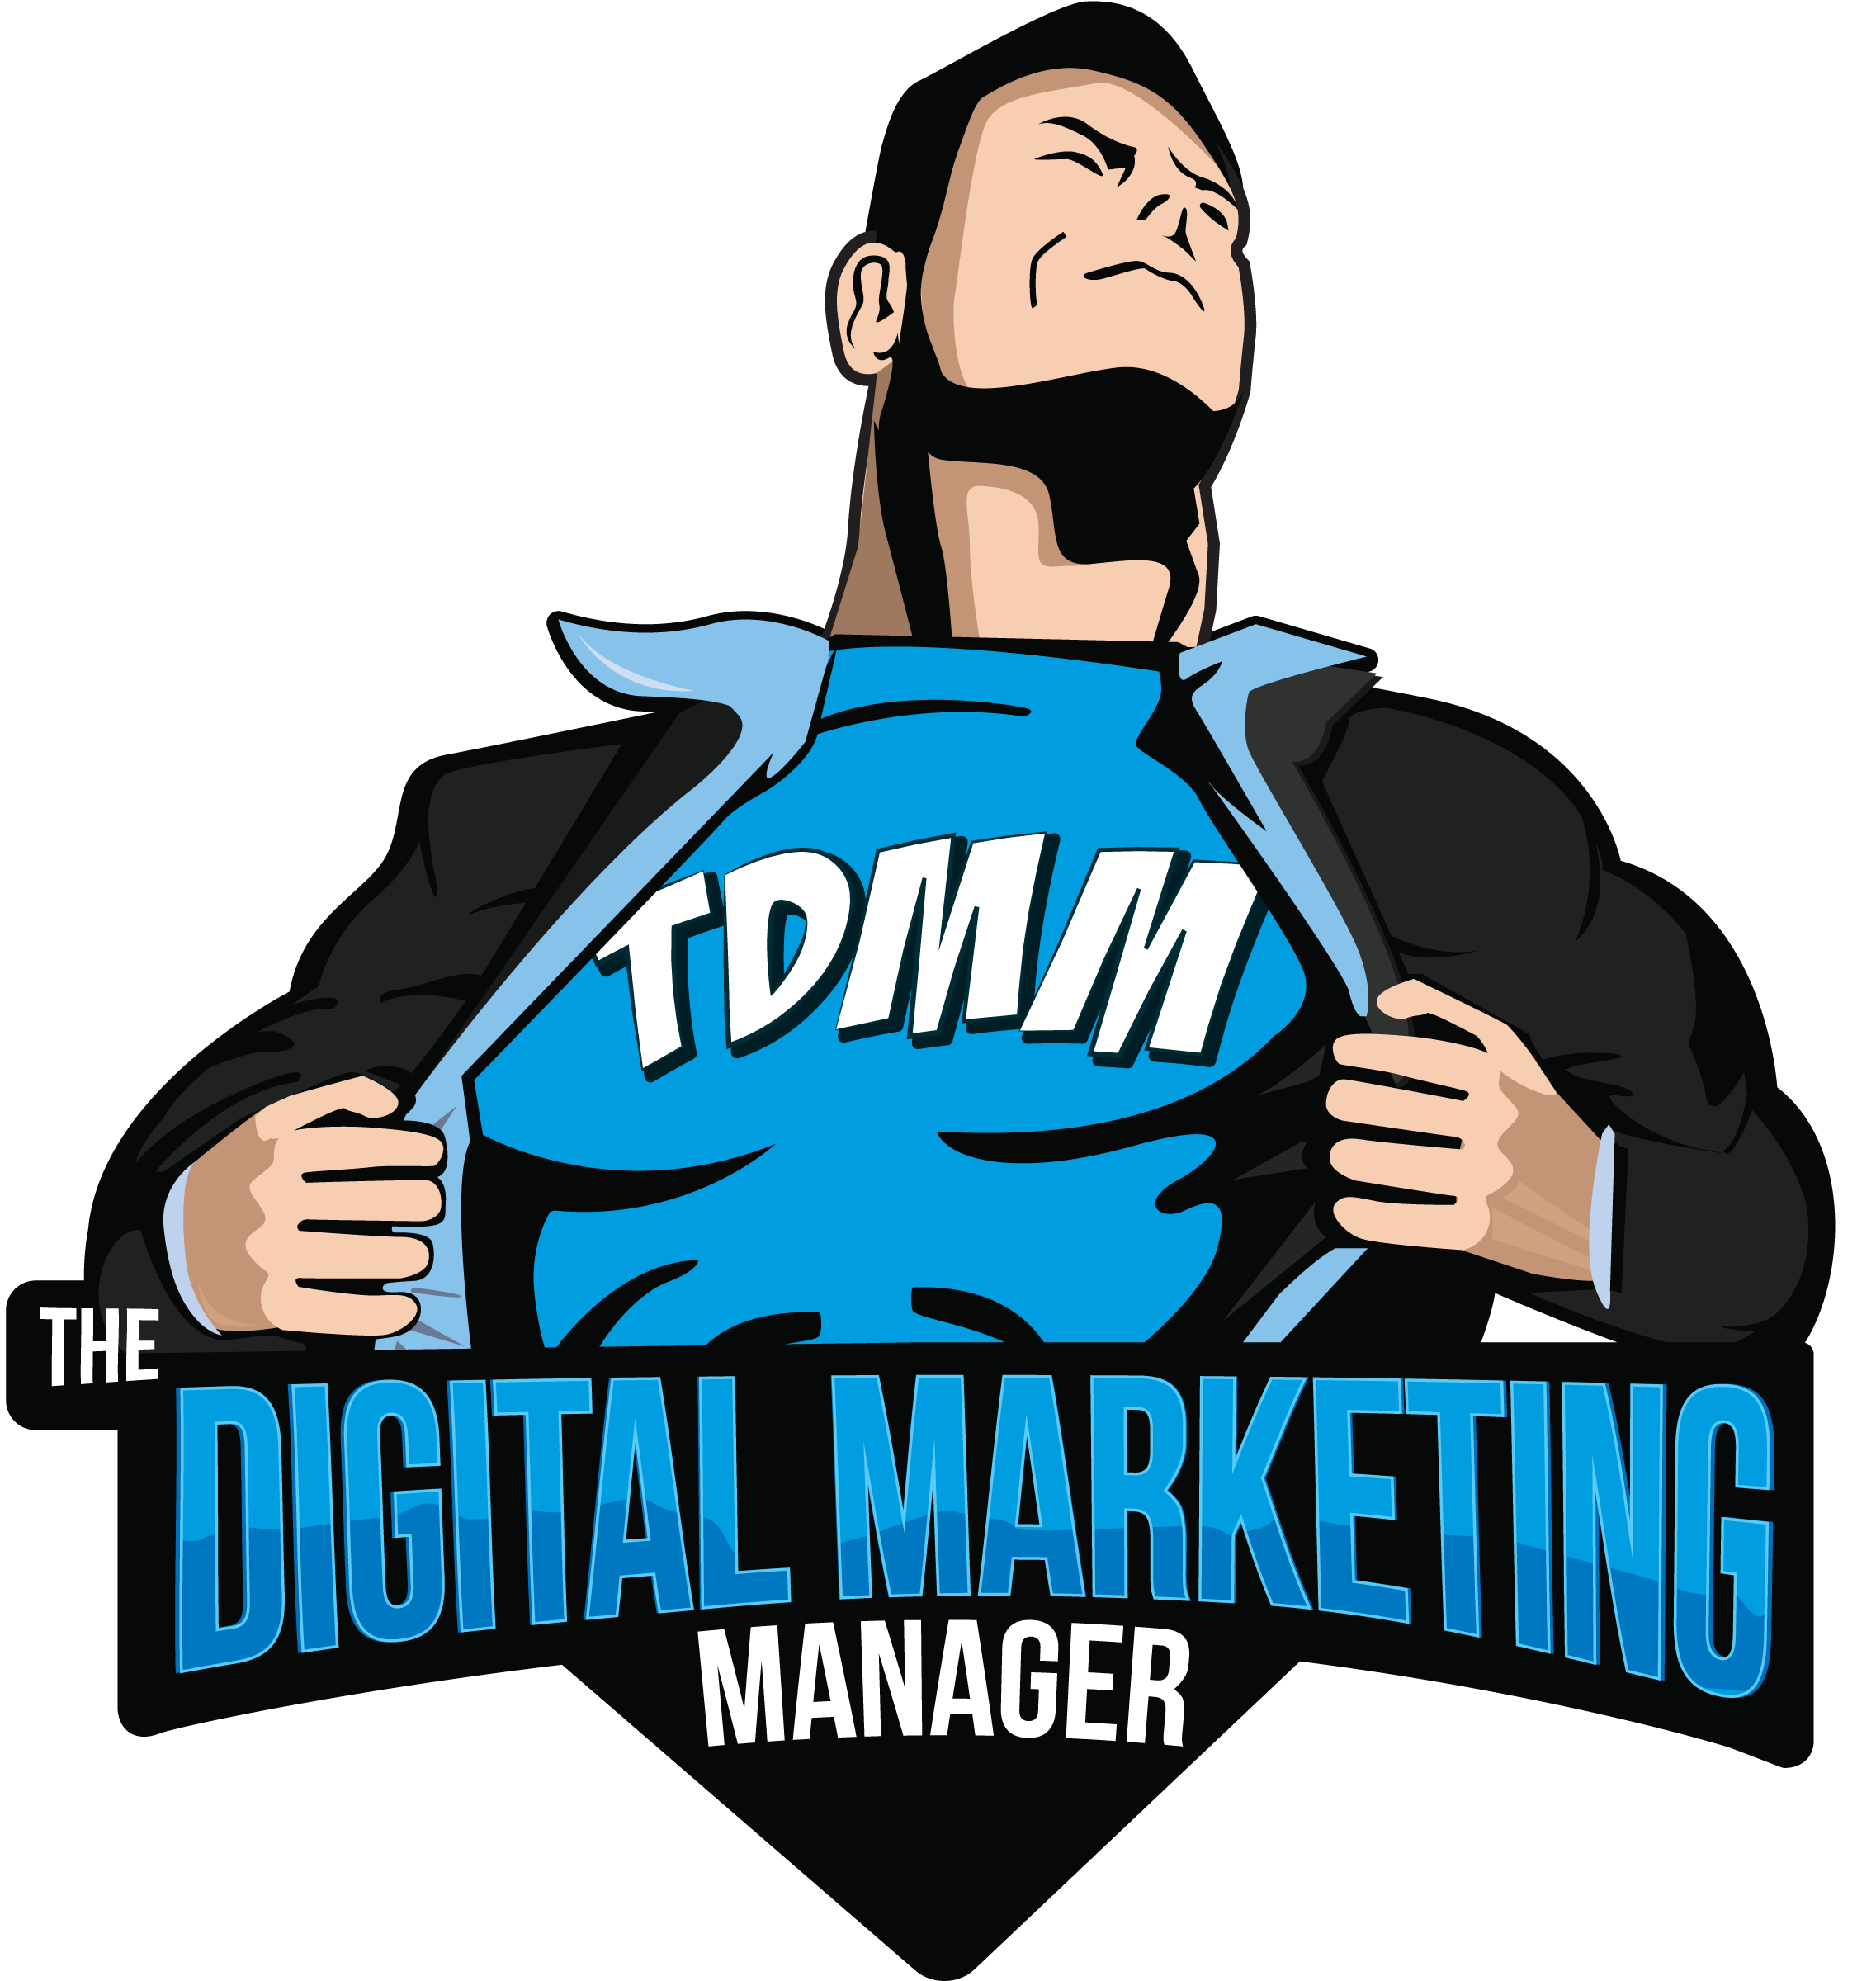 The Digital Marketing Manager